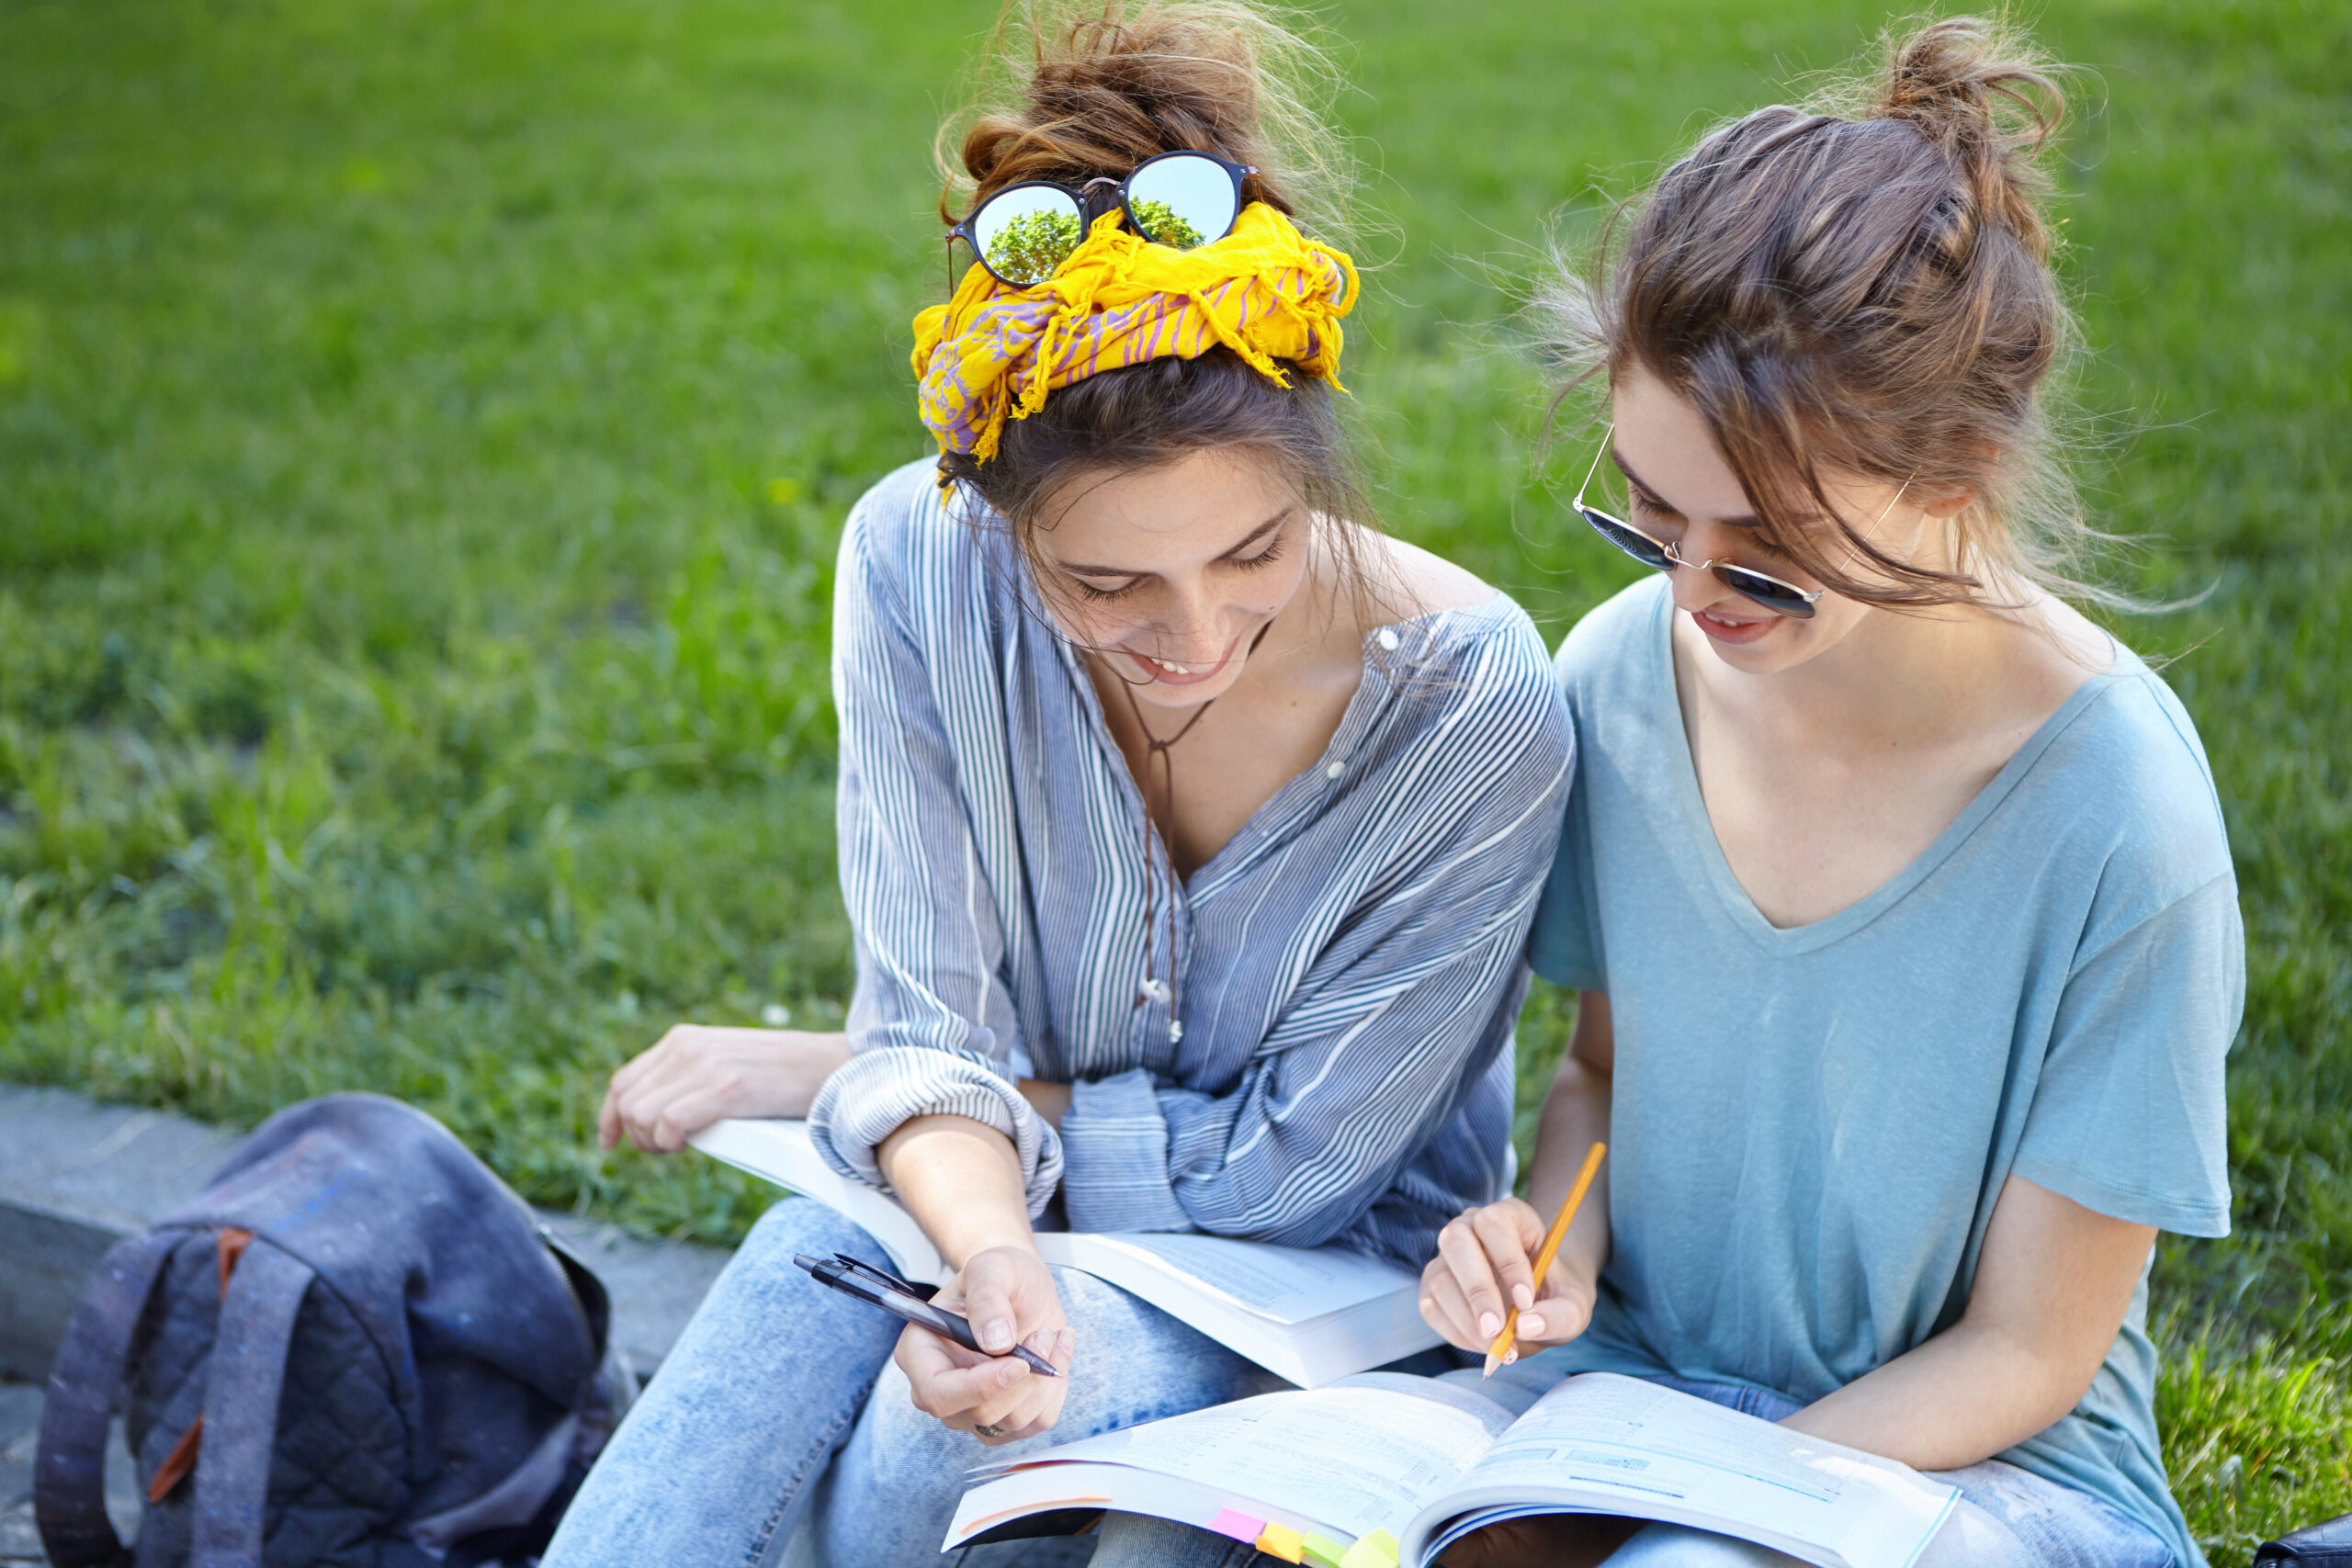 Two female students sitting at bench at college campus looking attentively in book writing something down with pencils admiring wonderful nature. Two university friends studying outdoors near lawn